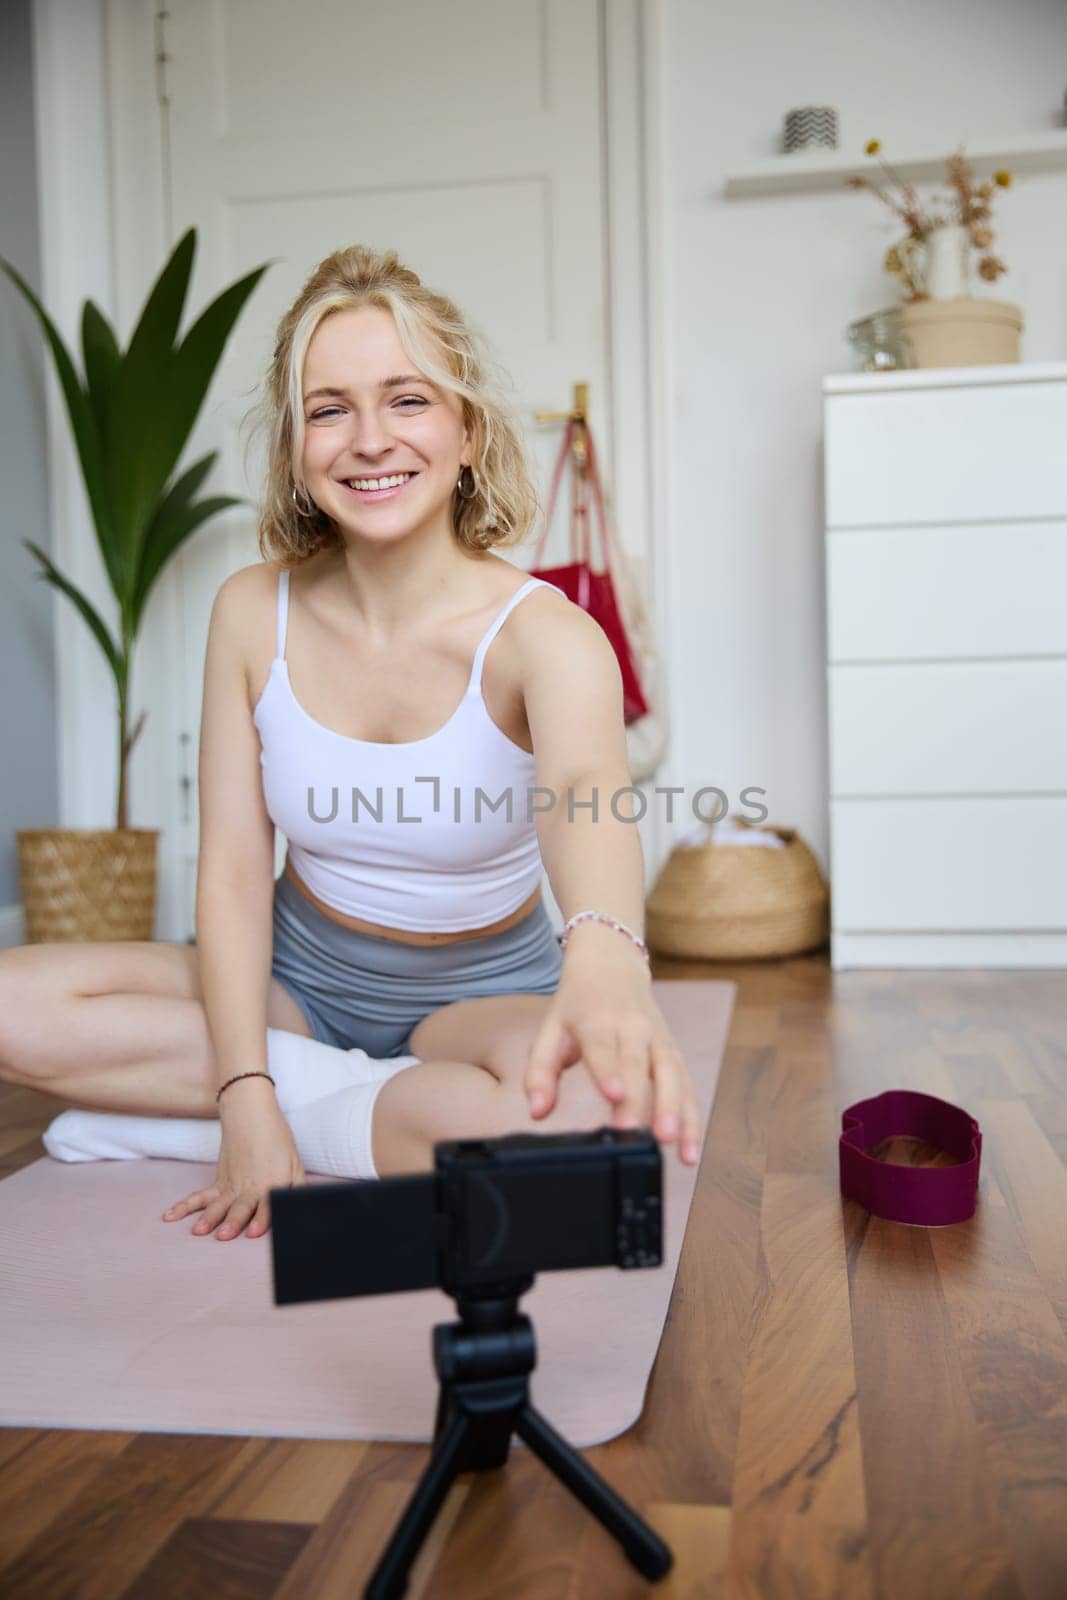 Vertical shot of smiling young woman, content creator using digital camera during workout, shooting a video vlog about fitness training and home exercises, recording her yoga.